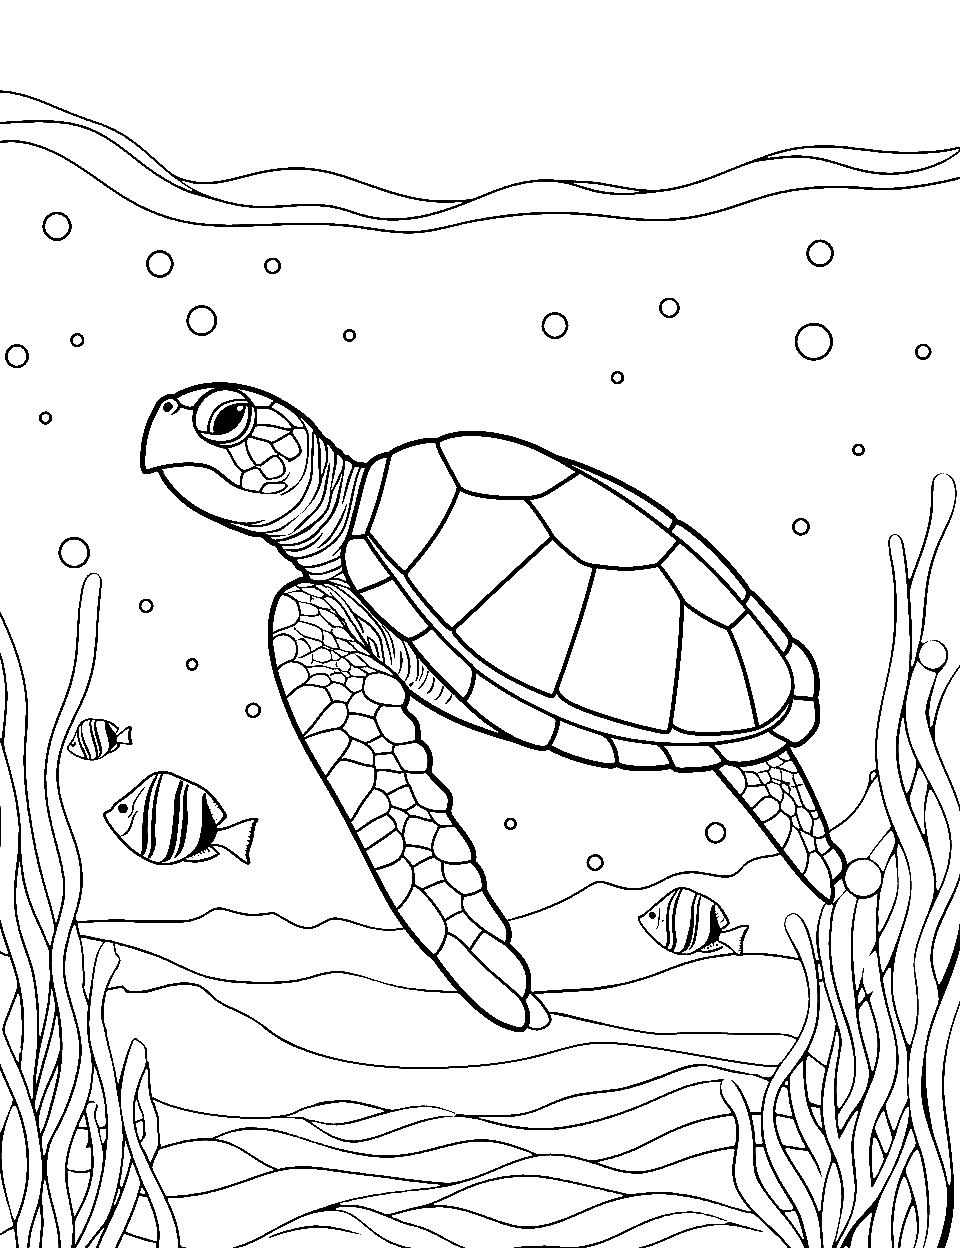 Fishy Friends Turtle Coloring Page - A turtle swimming alongside colorful fish in the ocean.